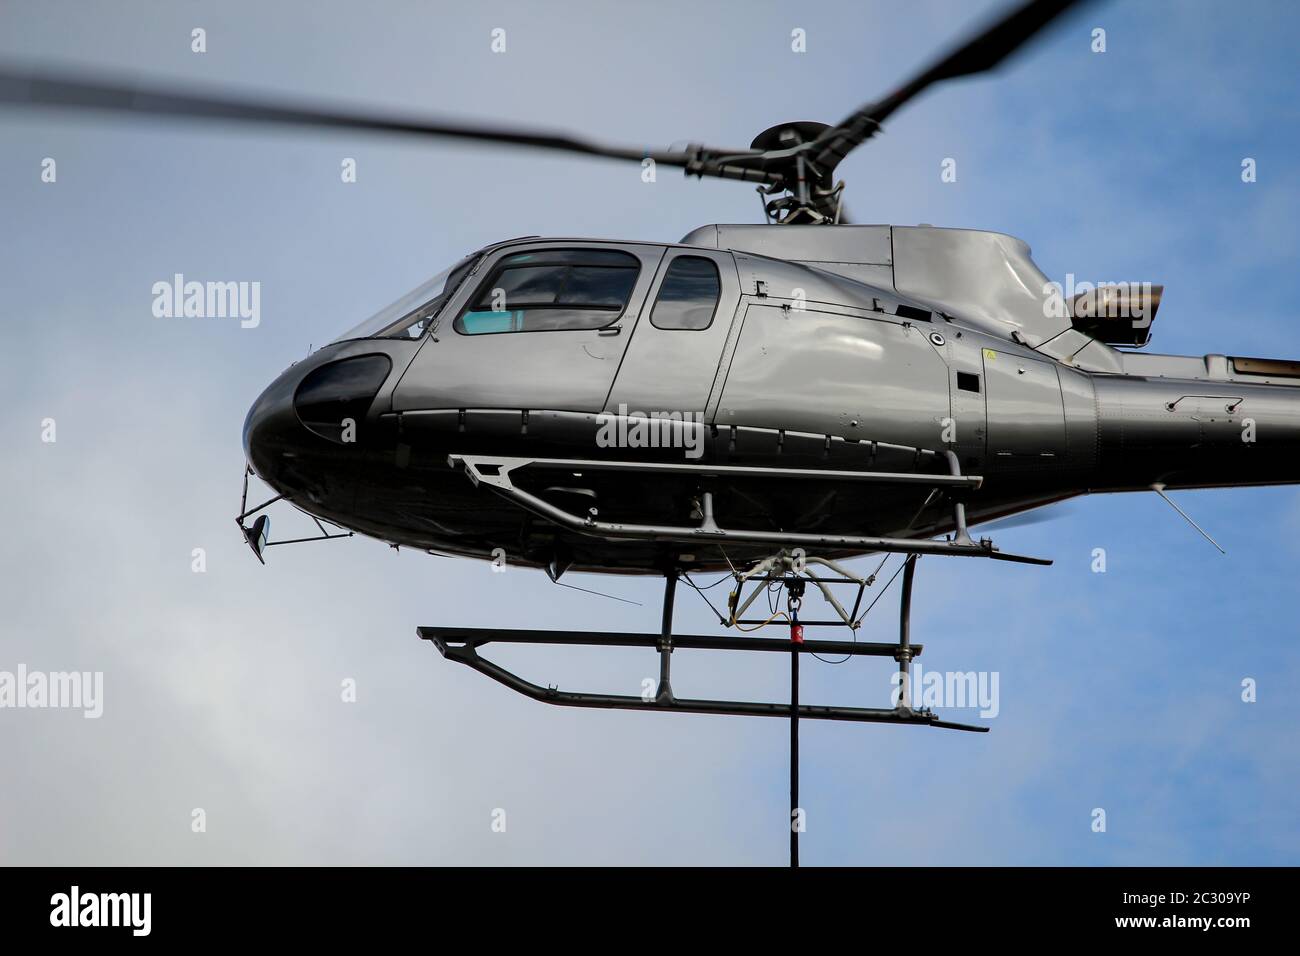 A cargo helicopter on the railway construction site KÃ¶then, mast transport Stock Photo